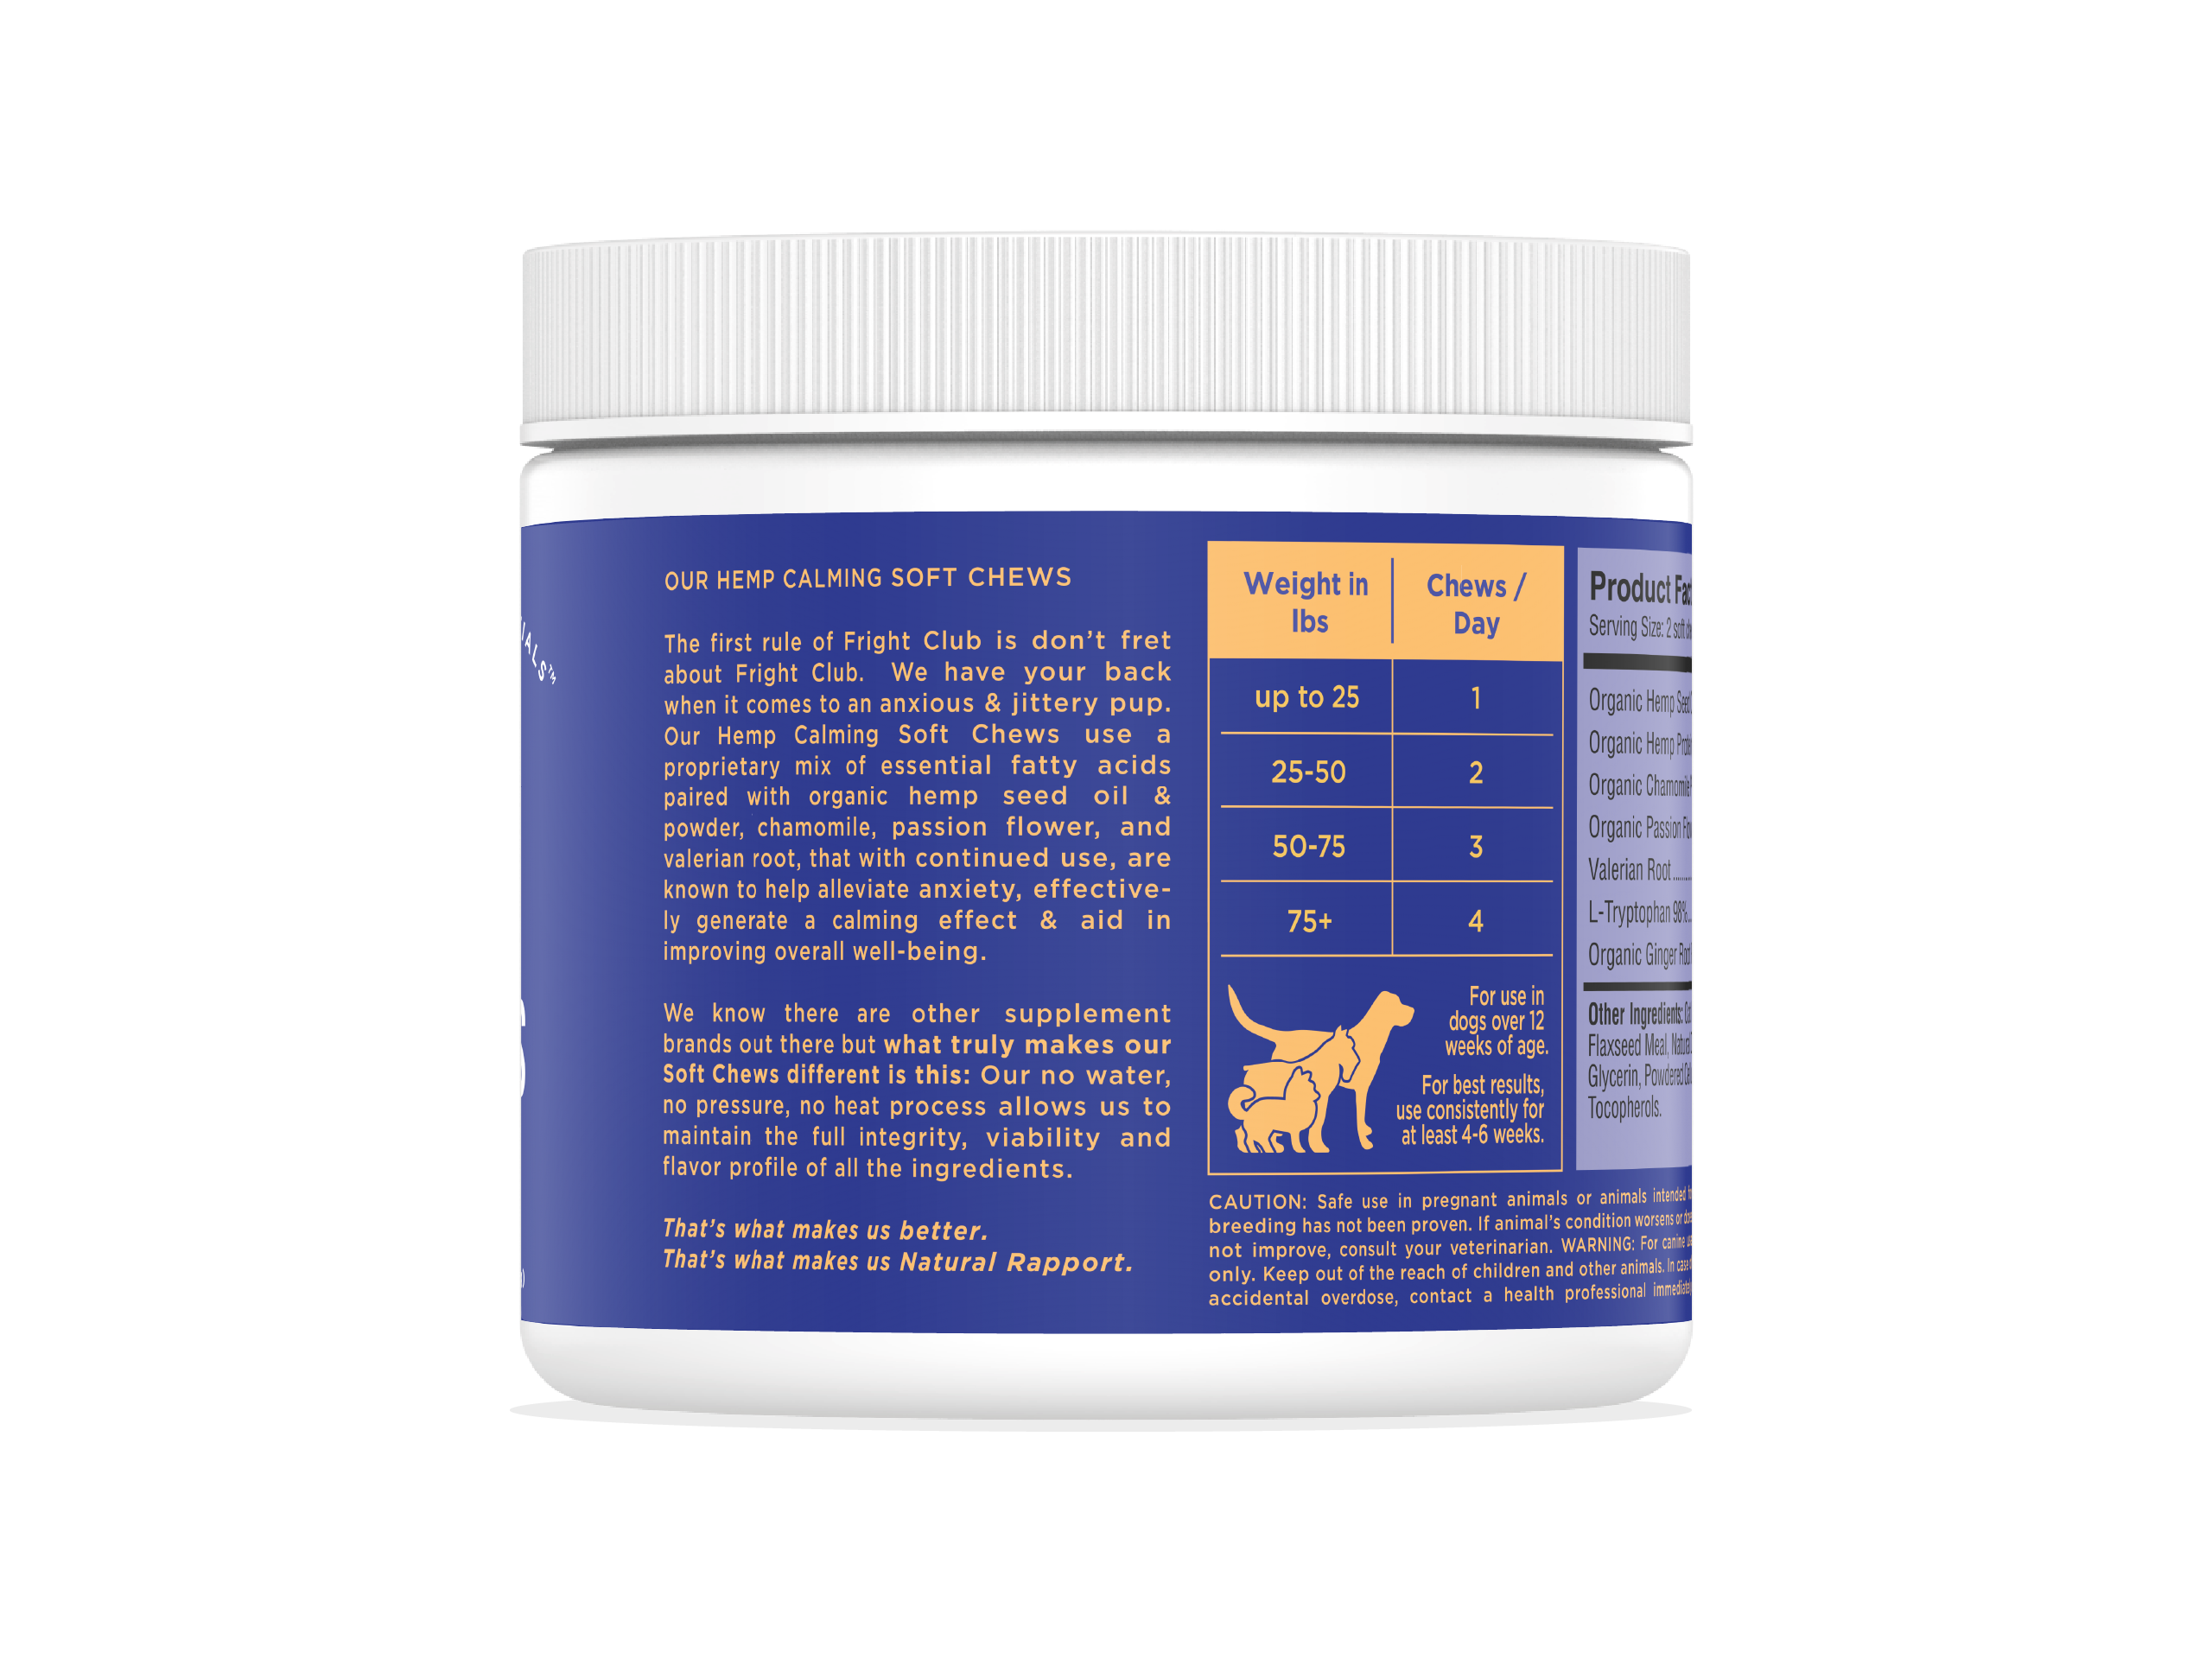 Natural Rapport - The Only Calming Soft Chews Dogs Need